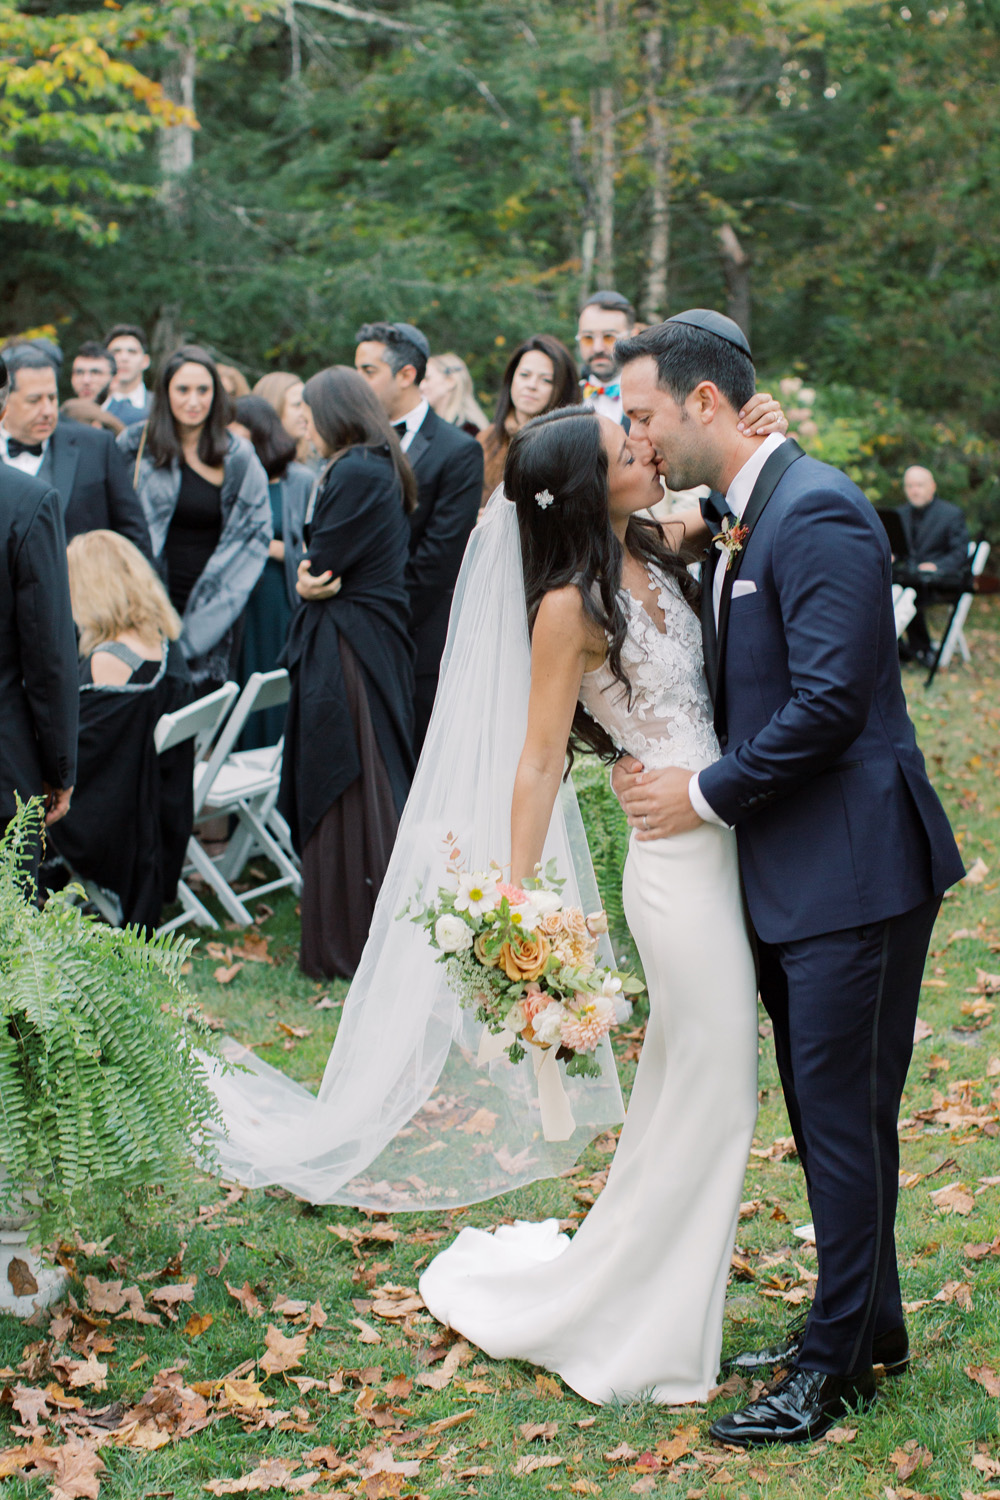 Bride and Groom Kiss Ceremony at Full Moon Resort Catskills Wedding by Mary Dougherty Photography